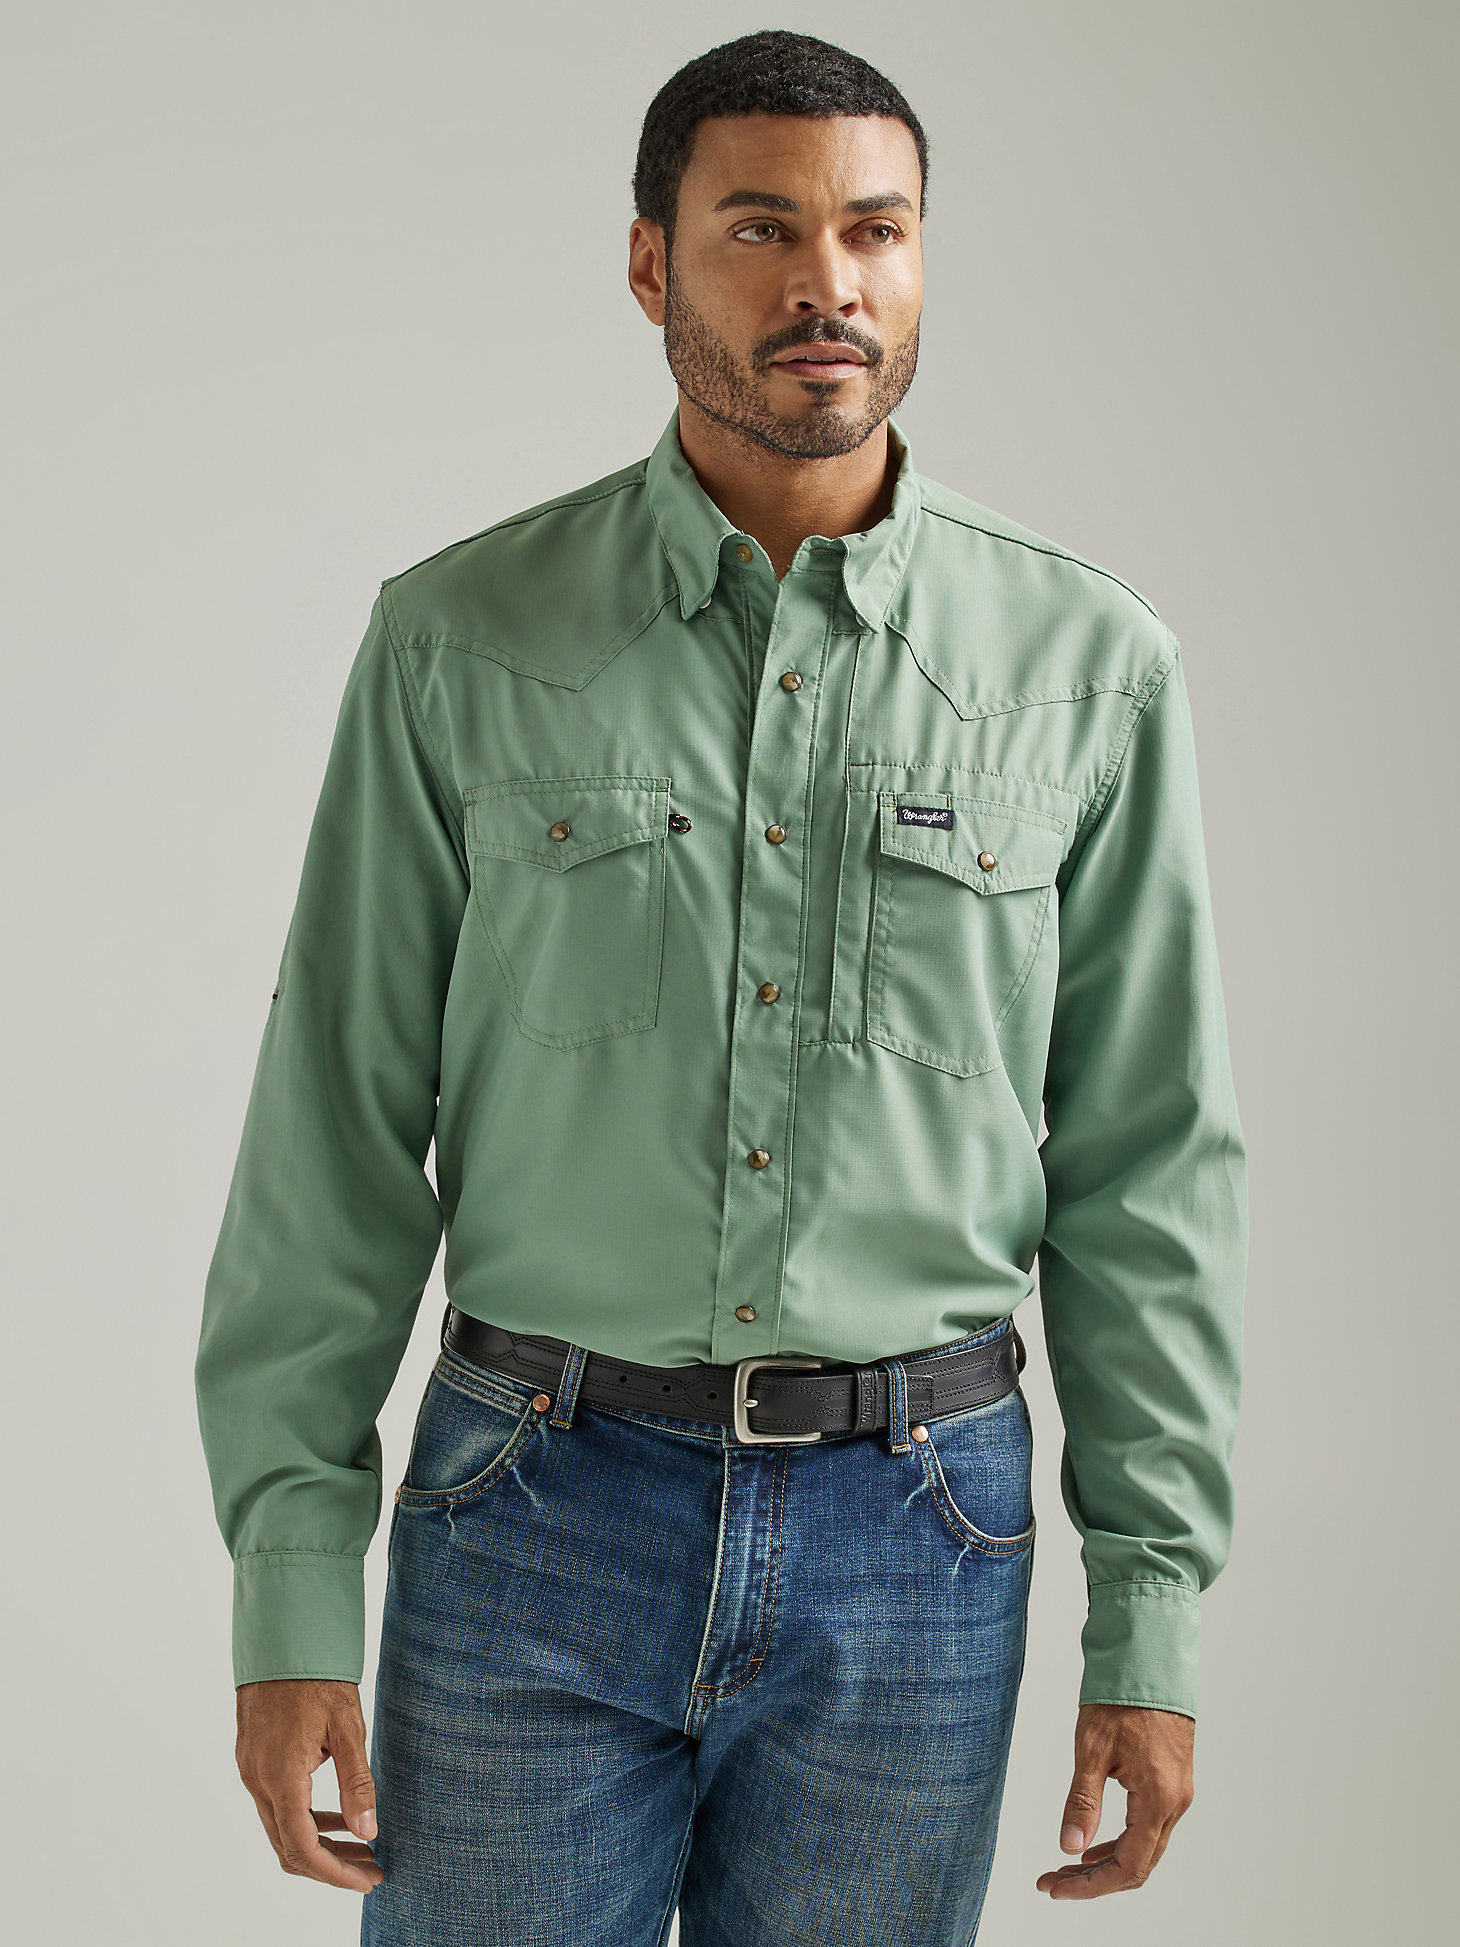 Men's Wrangler Performance Snap Long Sleeve Solid Shirt in Hedge Green main view